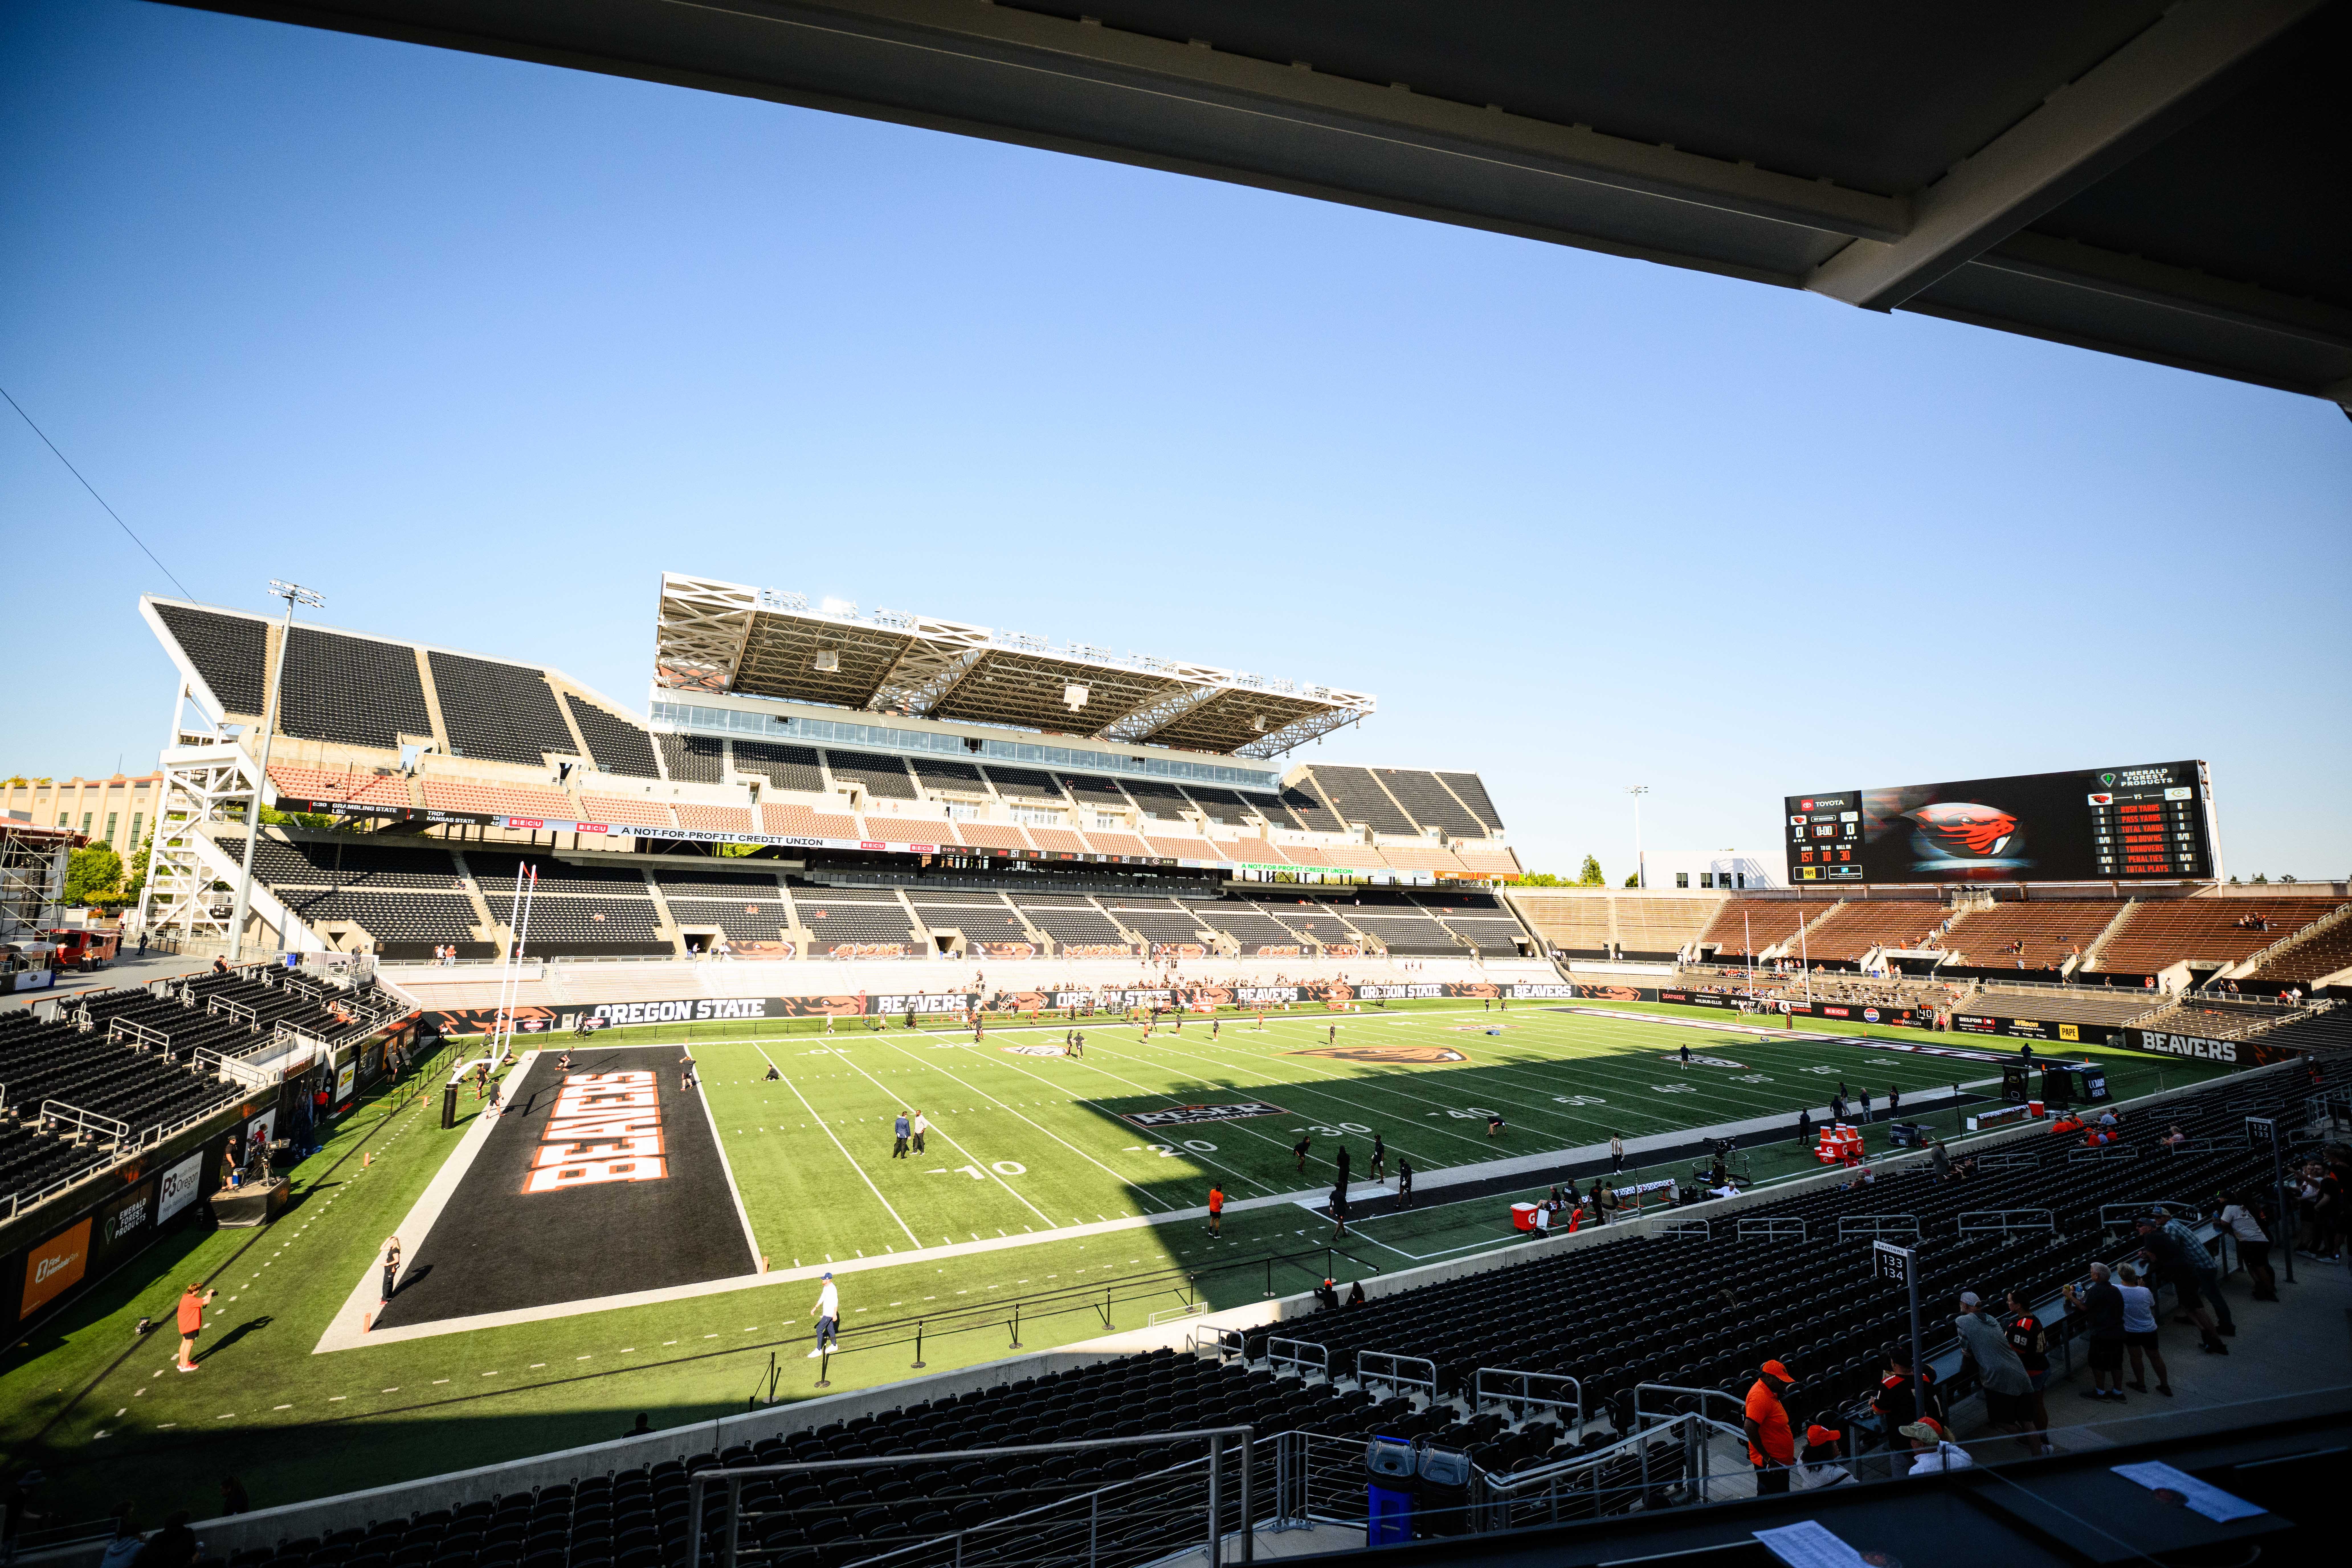 Oregon State, Washington State finalize 2024 schedules with Oregon